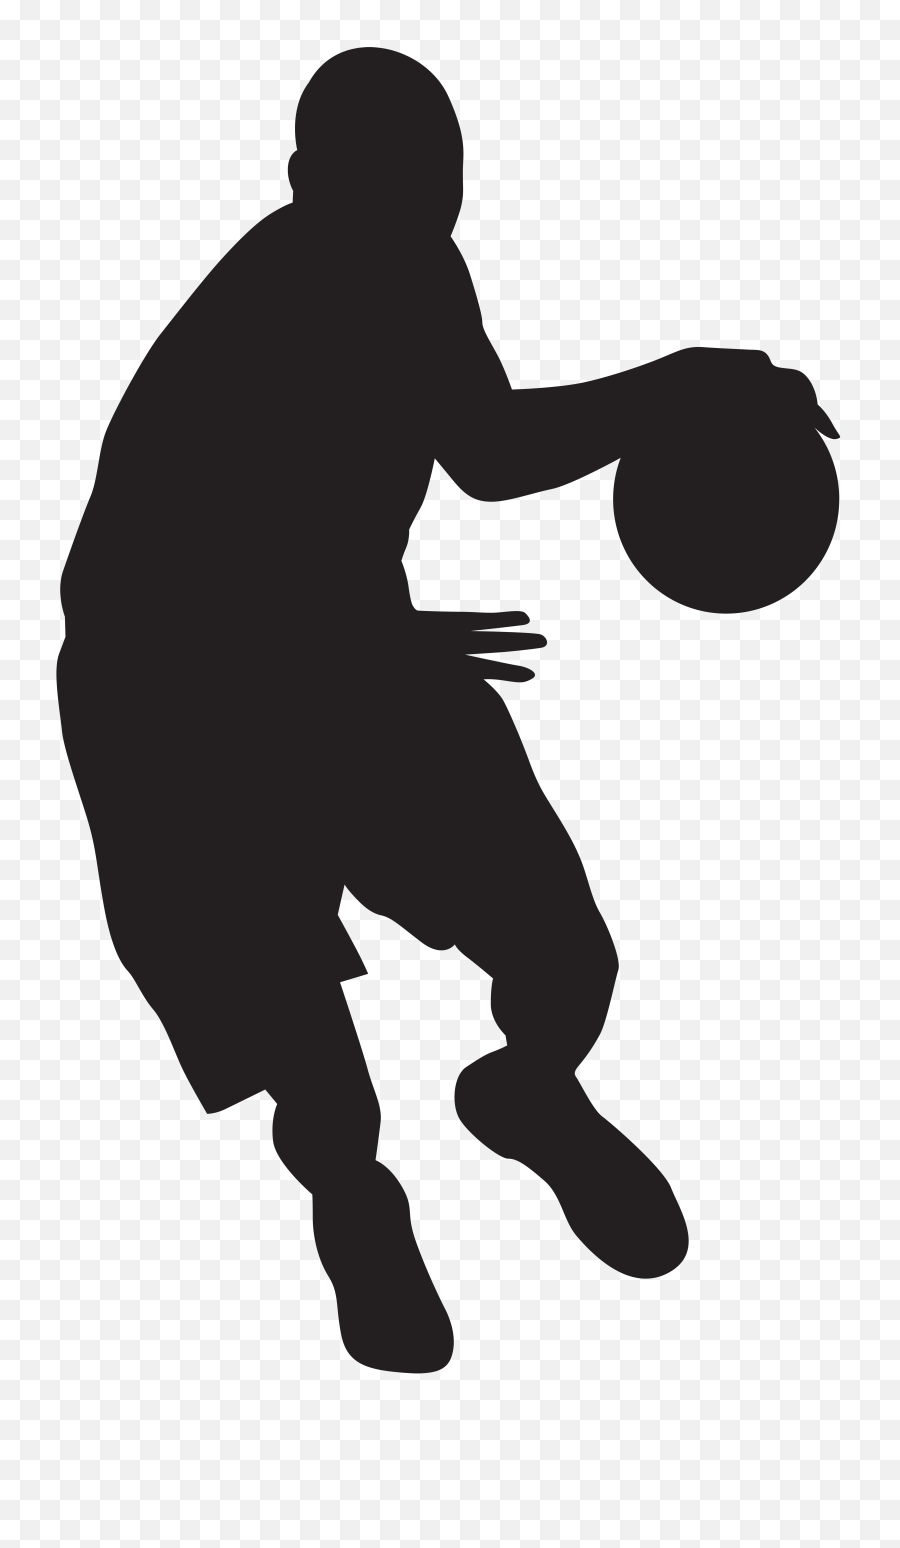 Basketball Player Silhouette Png Clip - Basketball Player Silhouette Png,Basketball Clipart Png